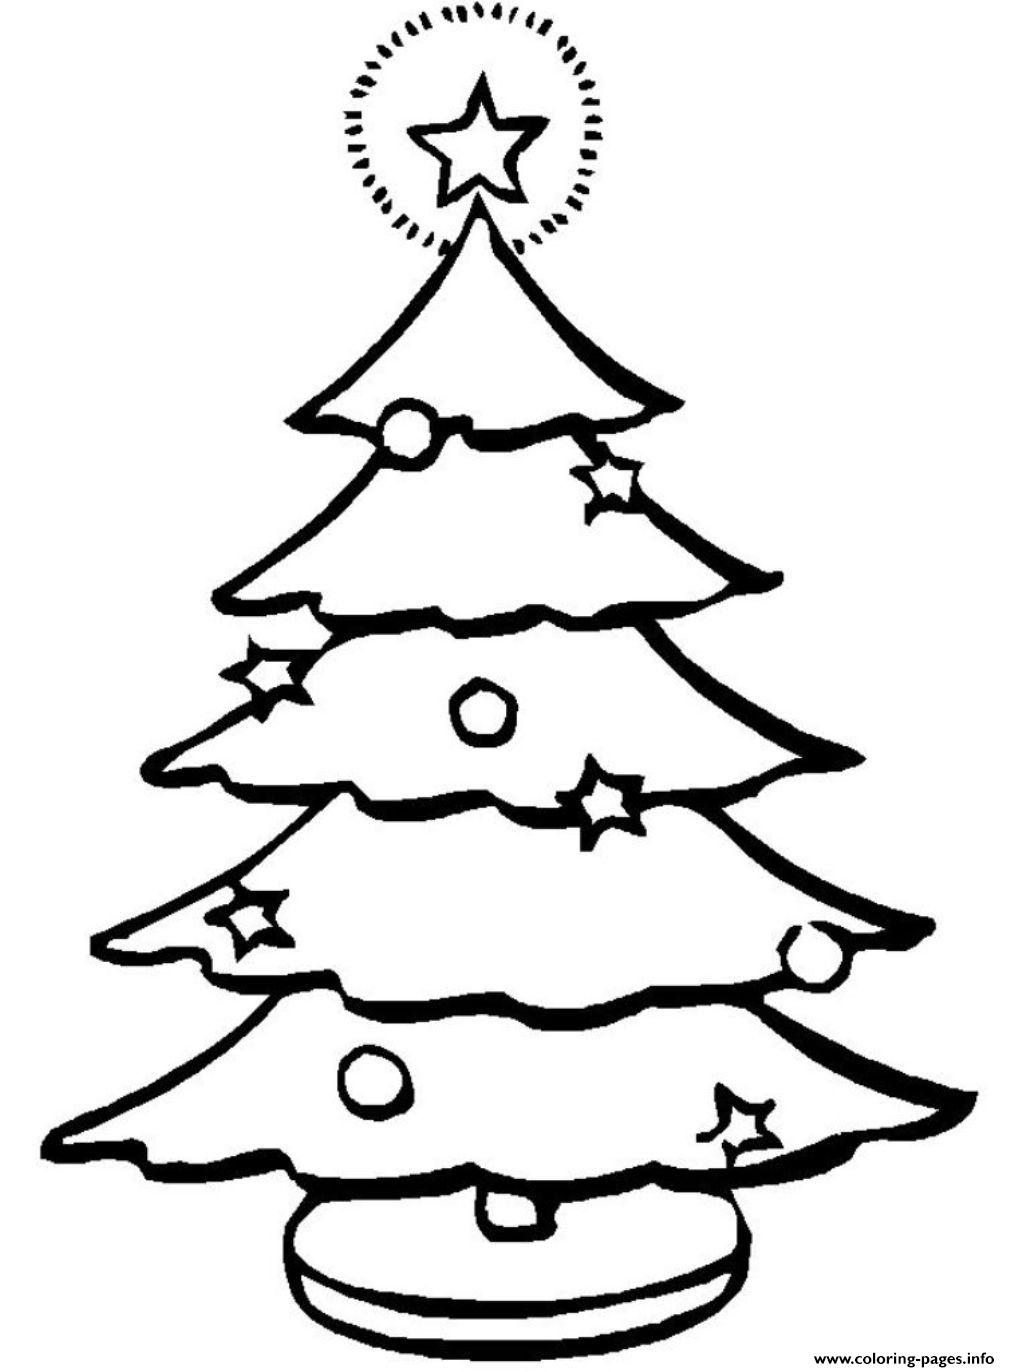 Coloring Pages Christmas Tree Printable313c coloring